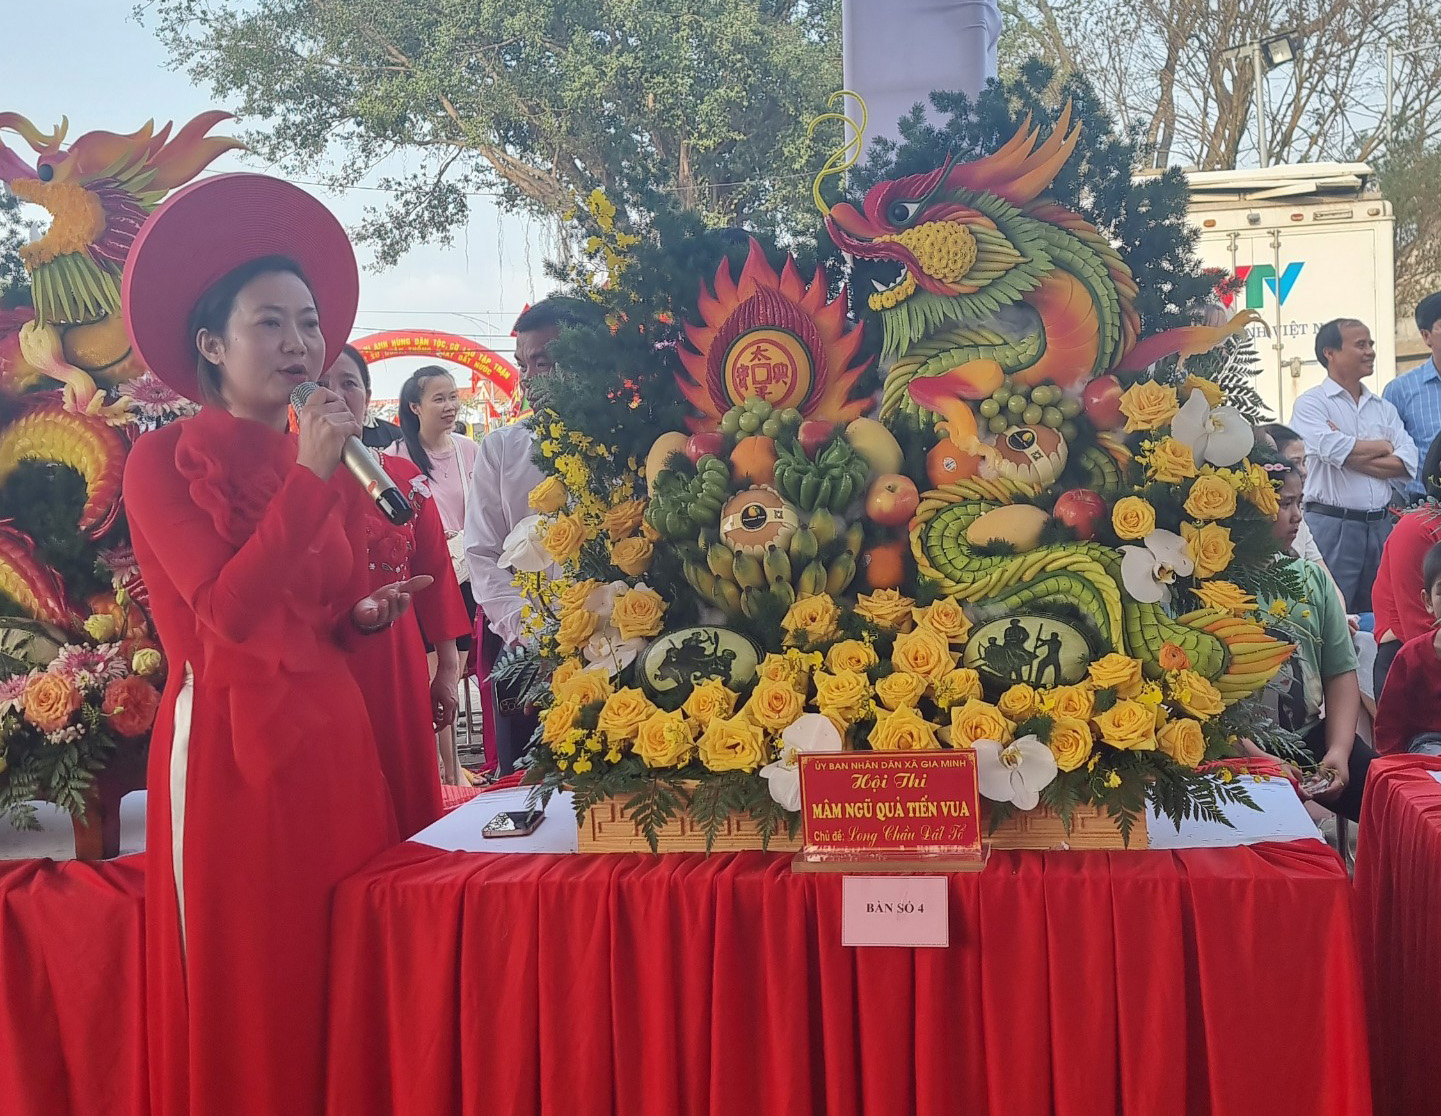 A person in red dress and hat standing next to a table with flowers

Description automatically generated